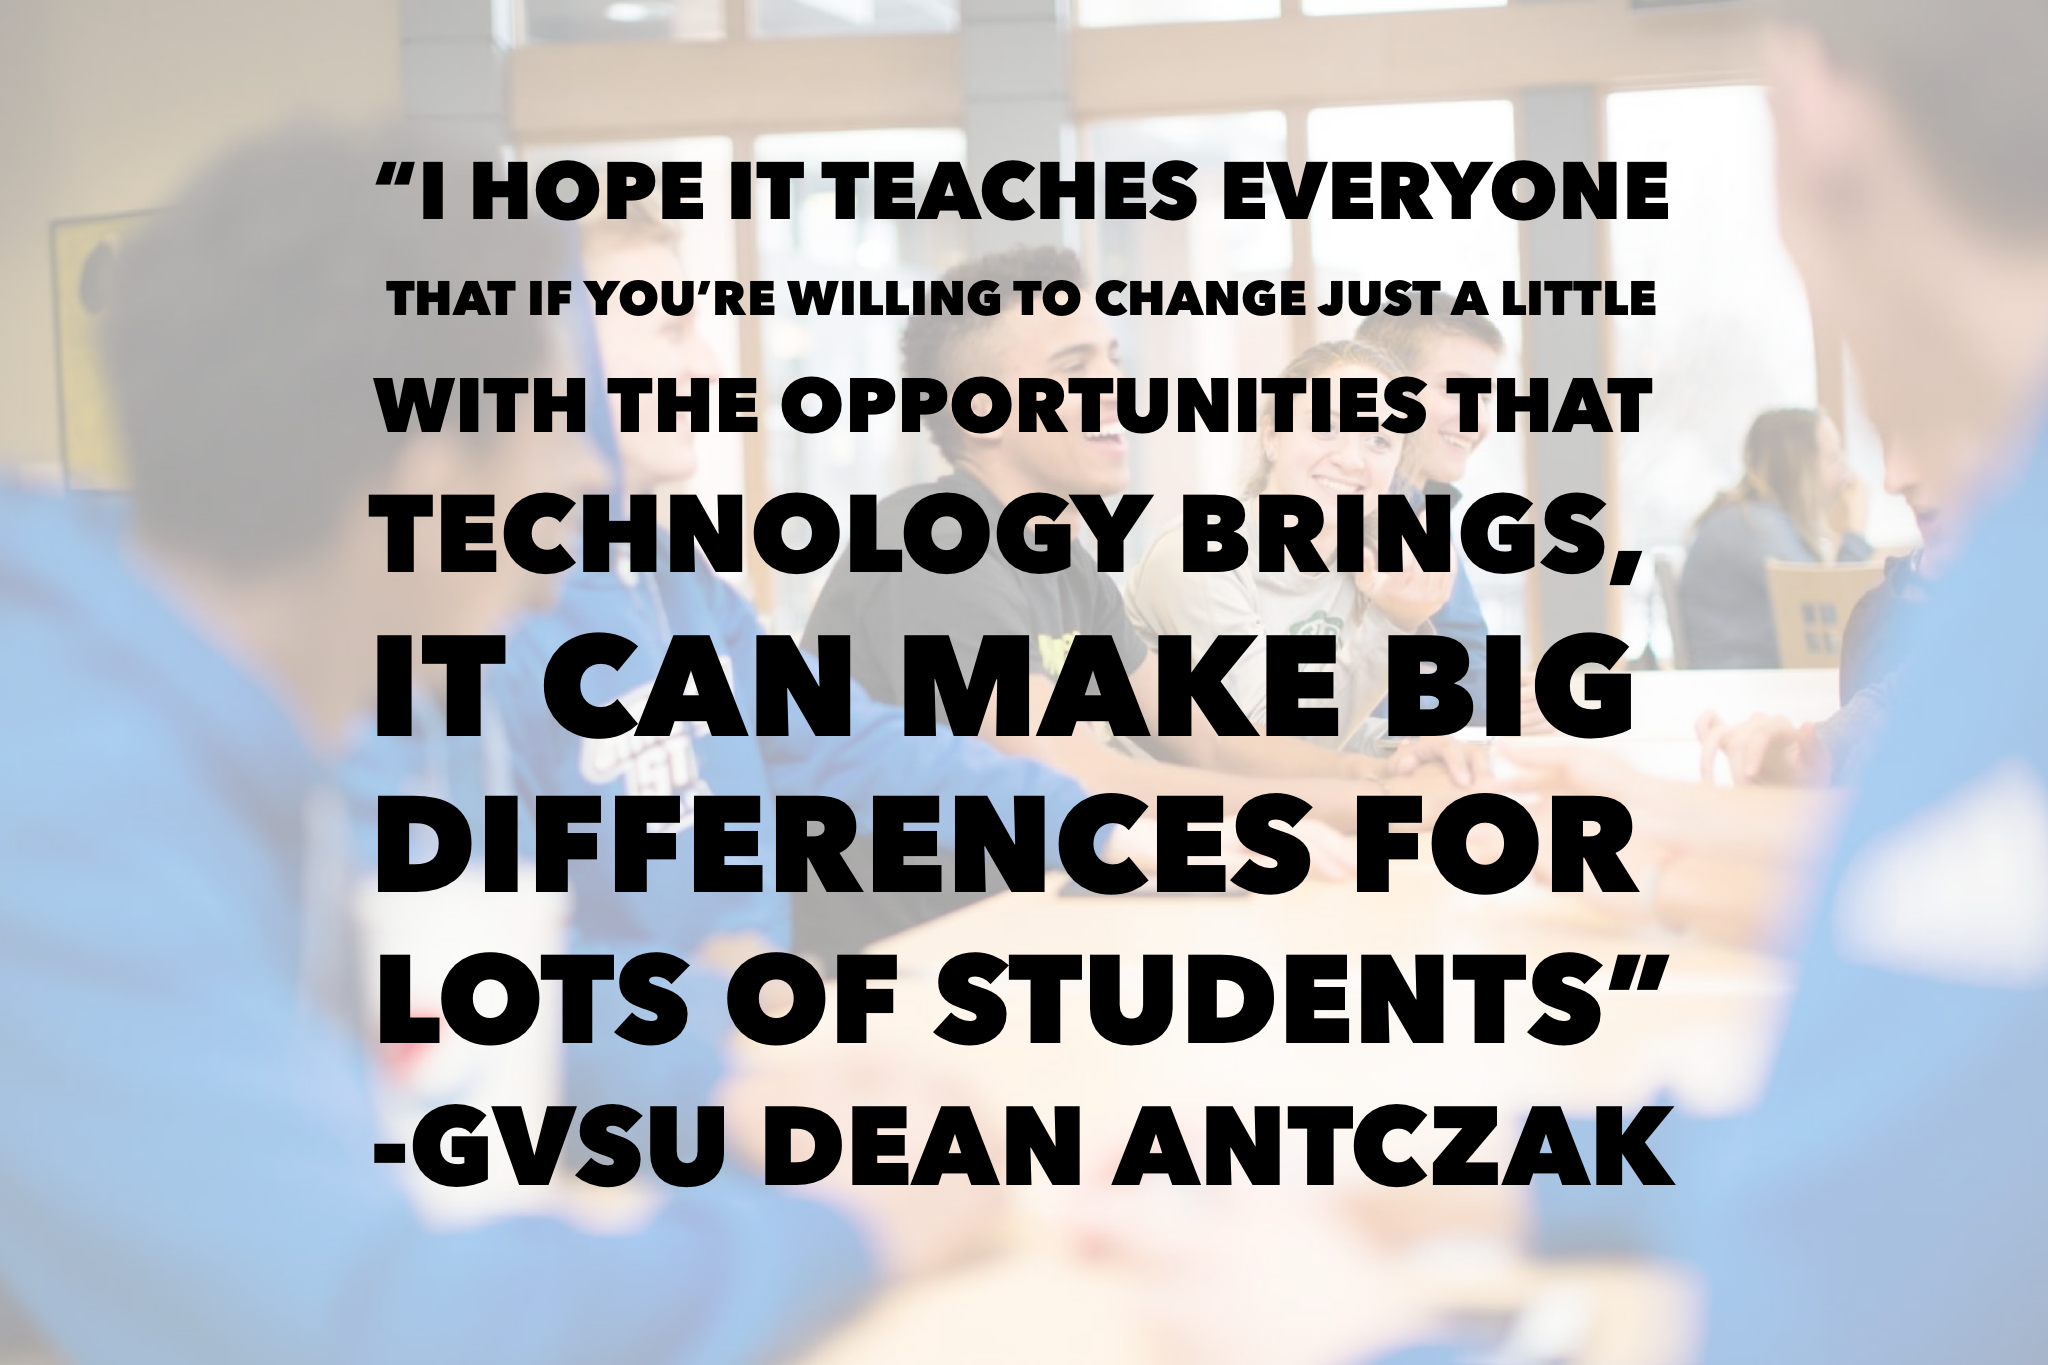 Image Description: “I hope it teaches everyone that if you’re willing to change just a little with the opportunities that technology brings, it can make big differences for lots of students” - GVSU Dean Antczak